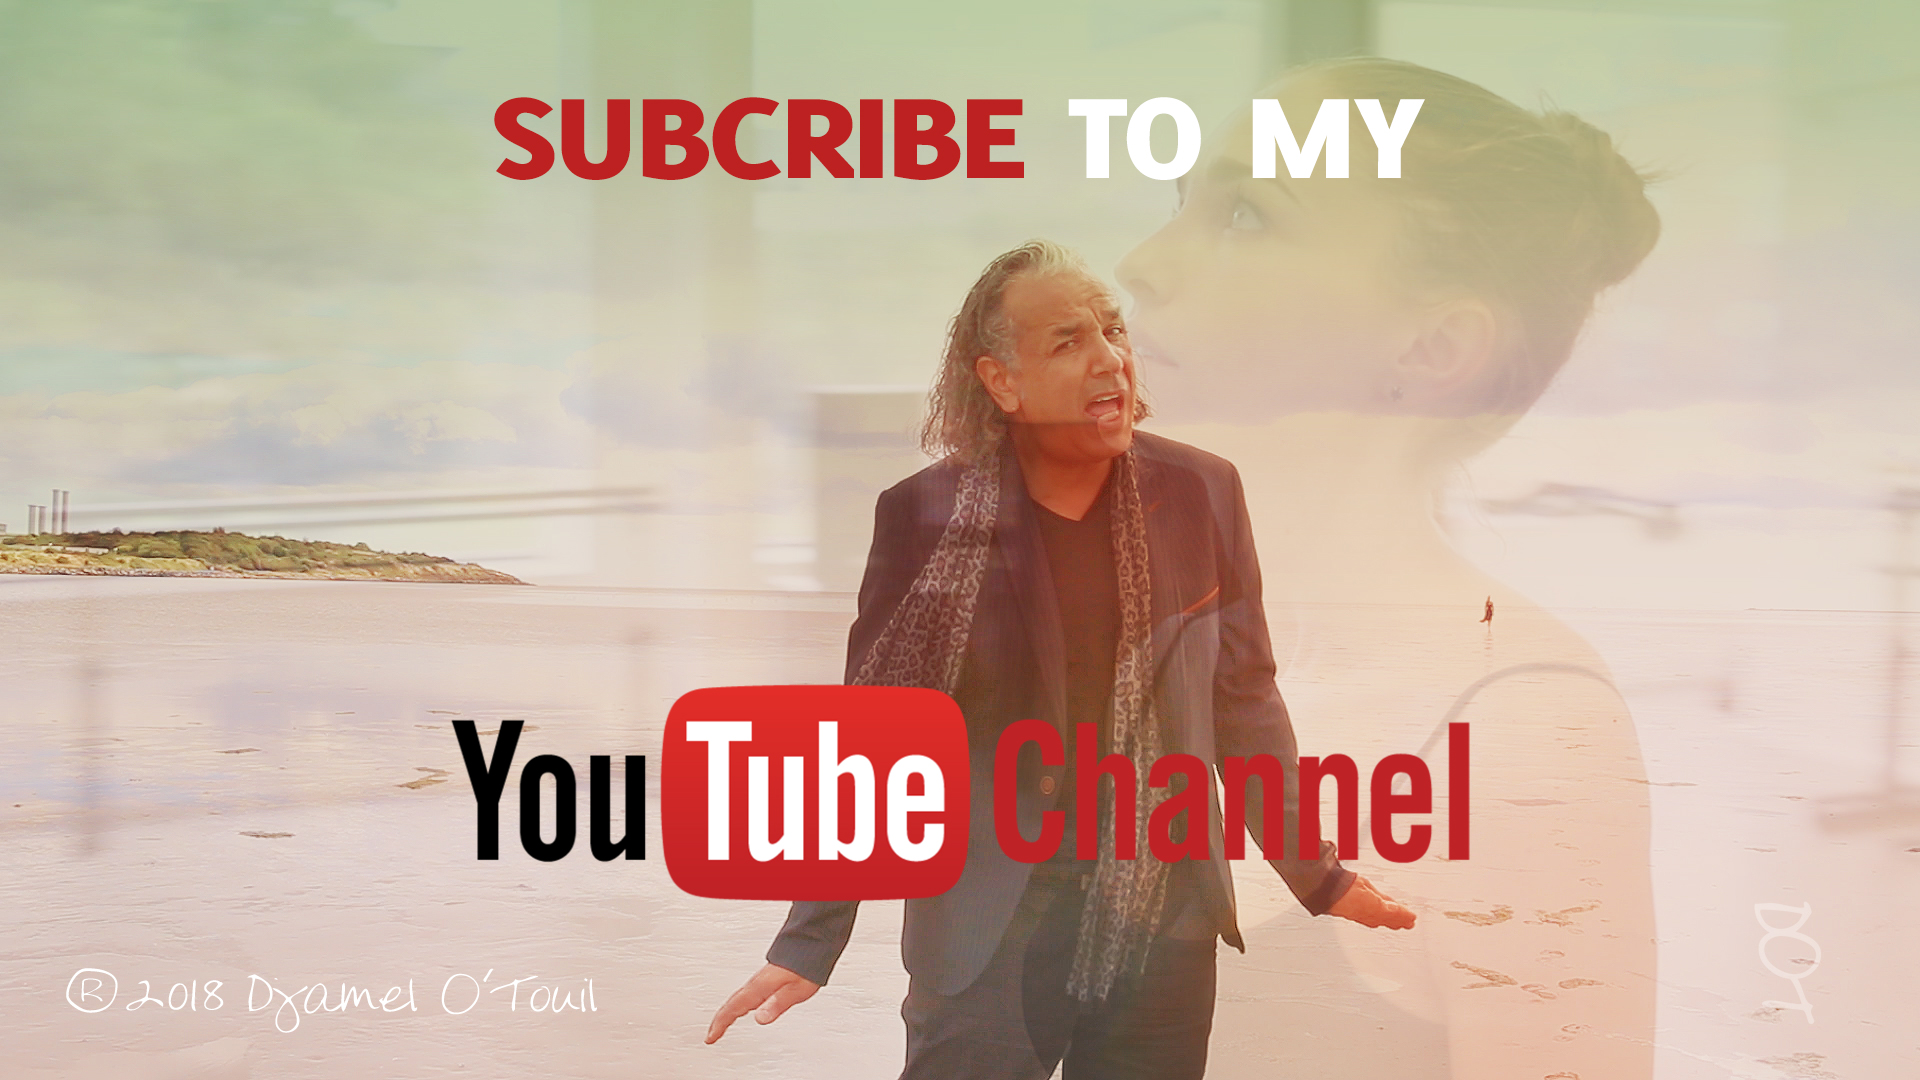 Djamel-O'Touil - Subscribe to my channel